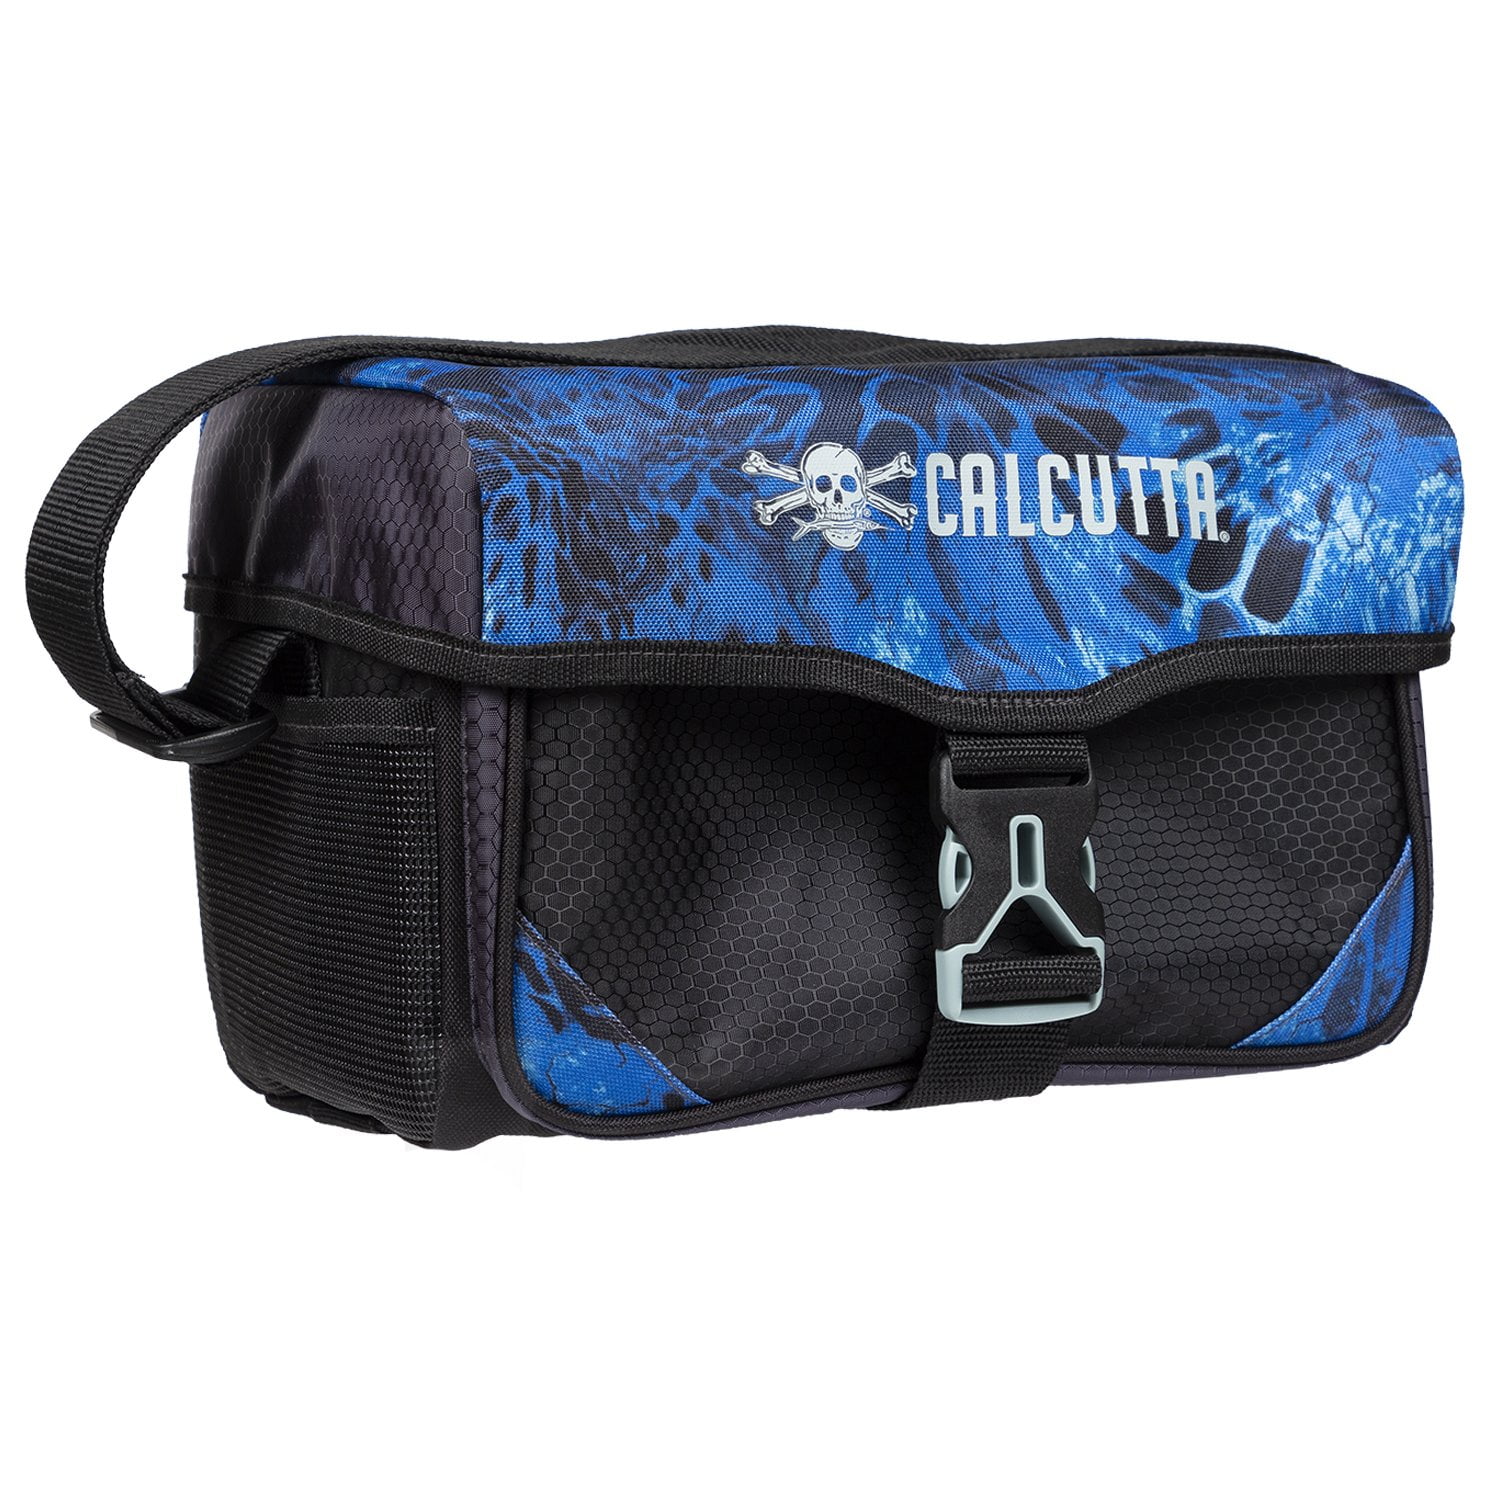 Durable Fishing Tackle Bag Storage Pockets Calcutta Squall 3600 Express Tackle Bag Prym1 Shoreline Camo Compact Size Adjustable Shoulder Strap 3 3600 Double Latch Trays 